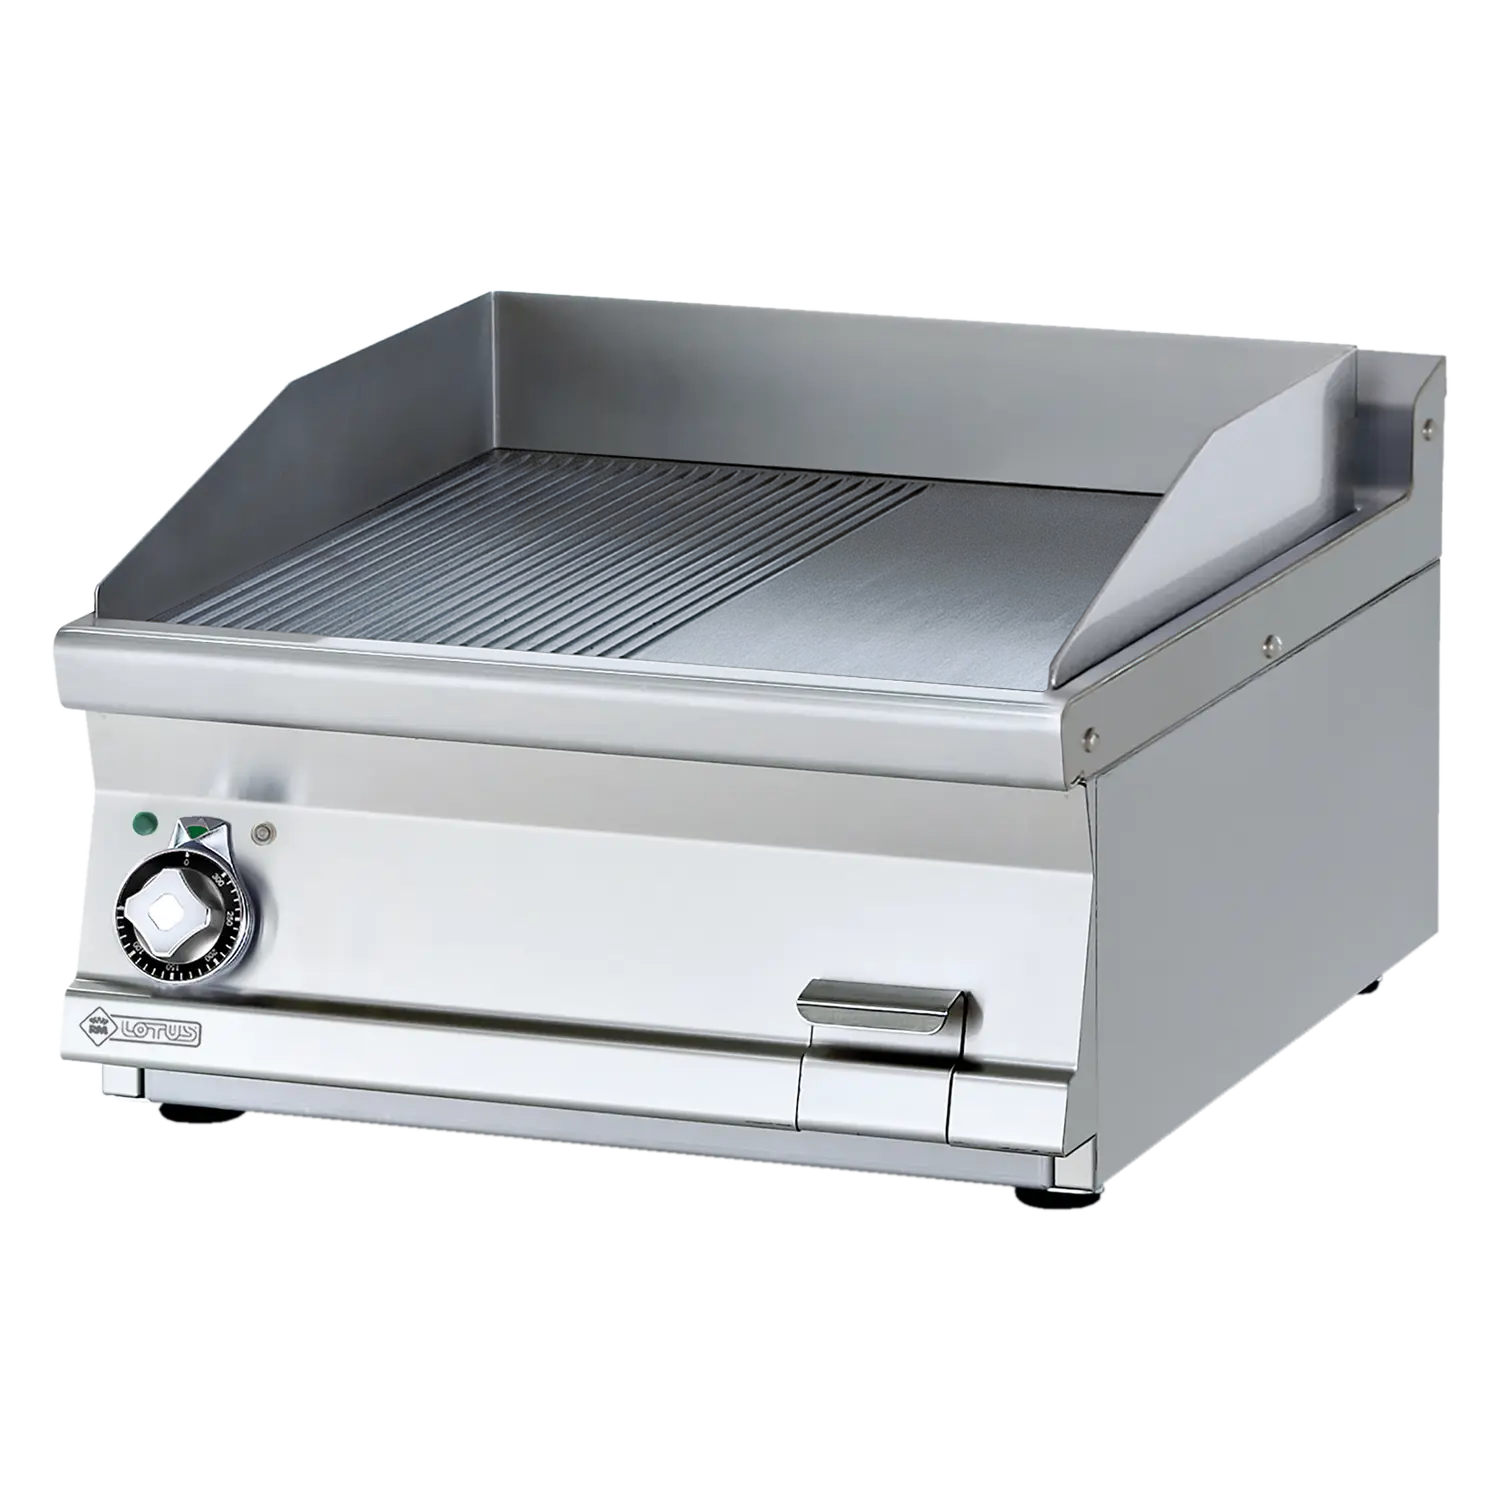 Fry-top griddle plate 59x52 electric combined without cabinet 400 V | RM - FTLRT-76ET